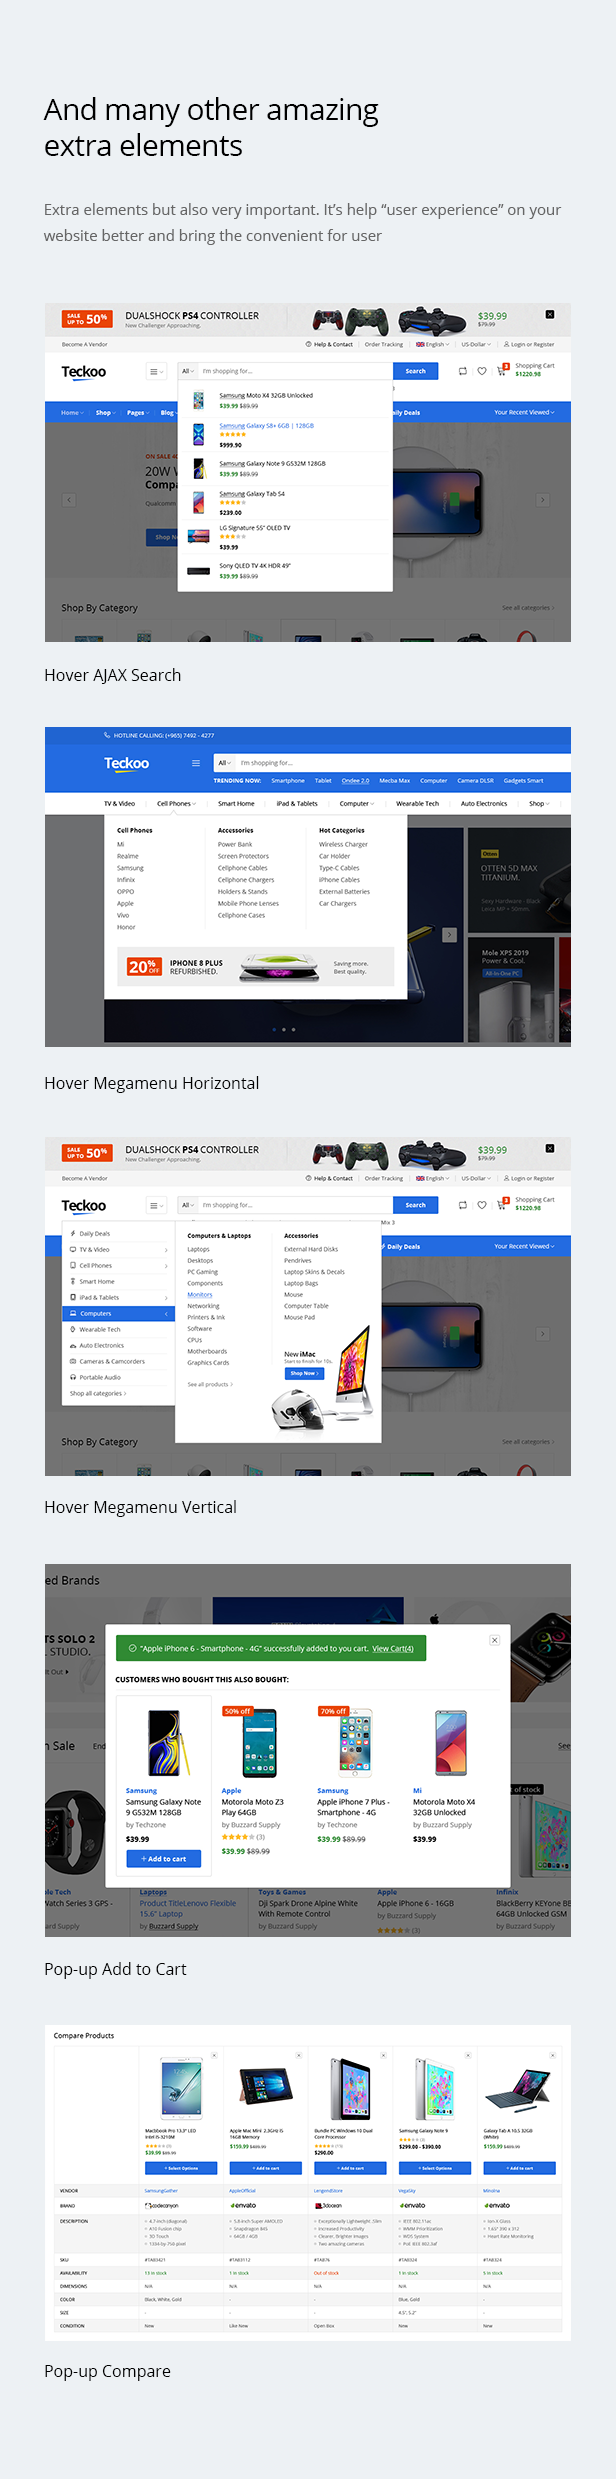 Teckoo - Electronic & Technology Marketplace eCommerce PSD Template - 15